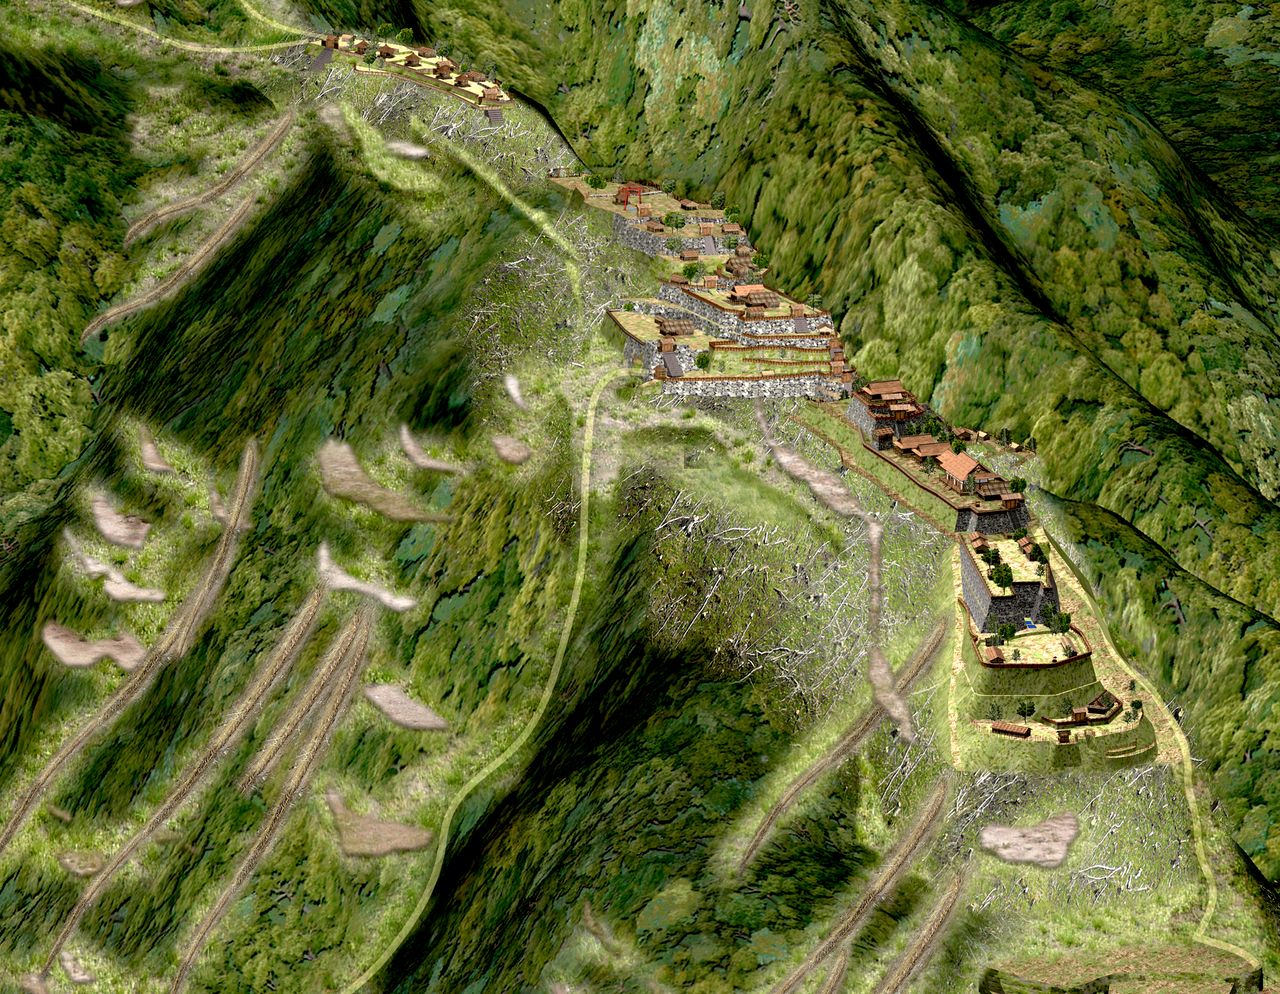 This computer-generated image is a reconstruction of Odani Castle in Nagahama, Shiga Prefecture, the residence for the Azai clan for three generations. It shows how the fortifications on the ridges were connected. The castle was abandoned after Azai Nagamasa was defeated by Oda Nobunaga. (Computer graphics courtesy of Naruse Kyōji)